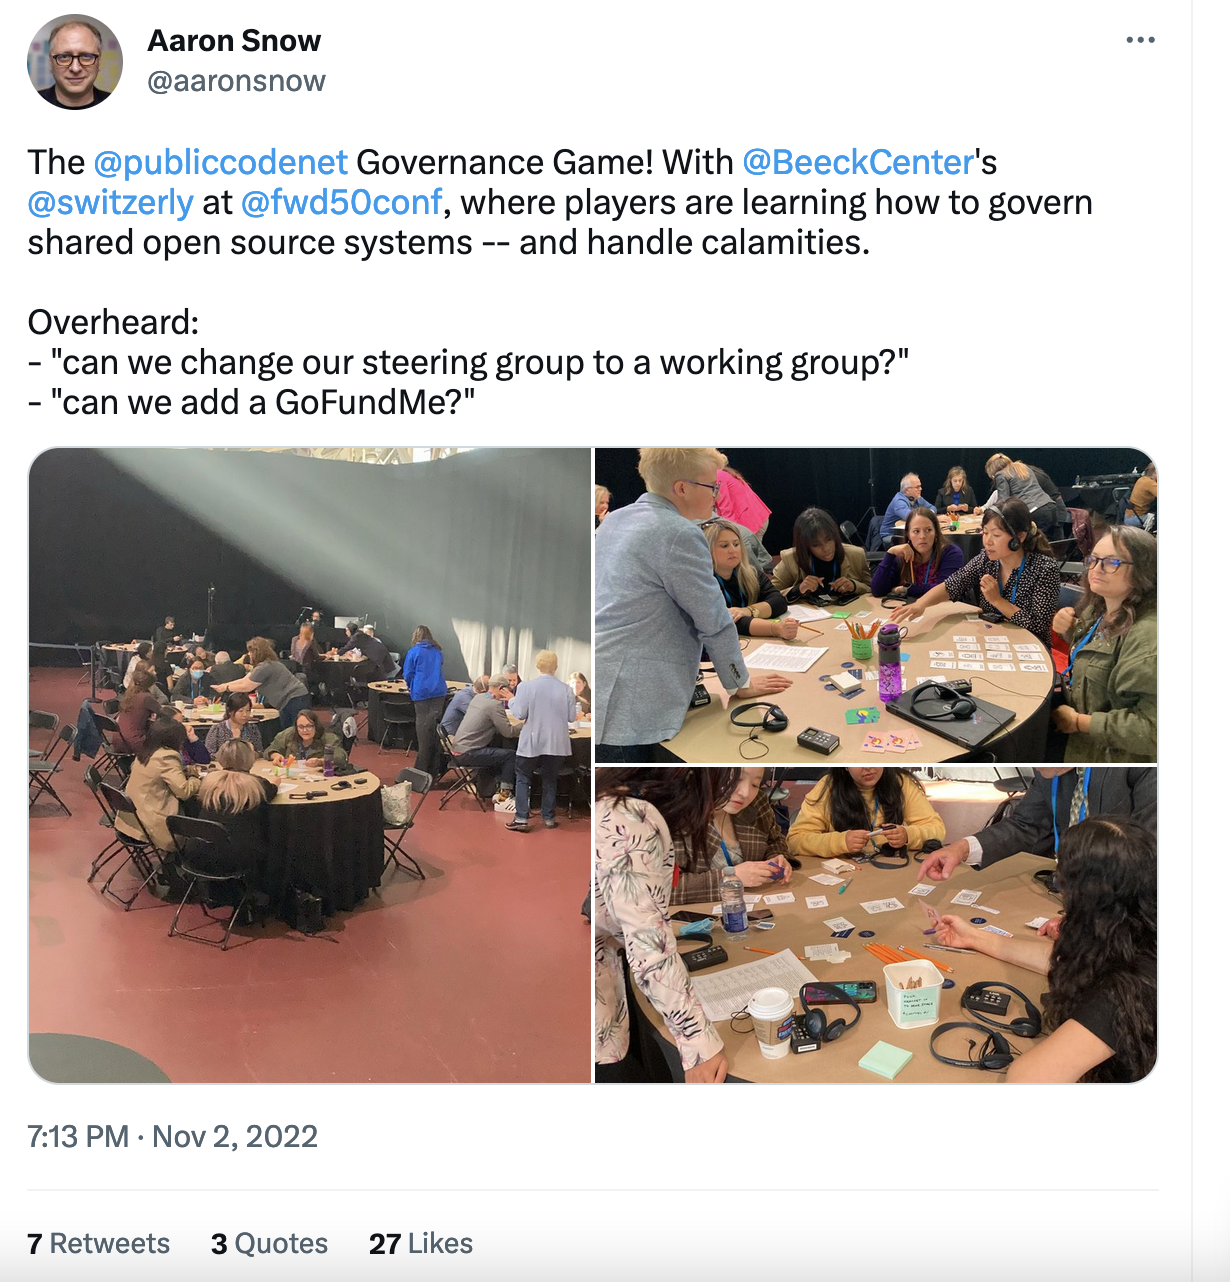 Screenshot of @aaronsnow tweet about the Governance Game session at the @fwd50conf